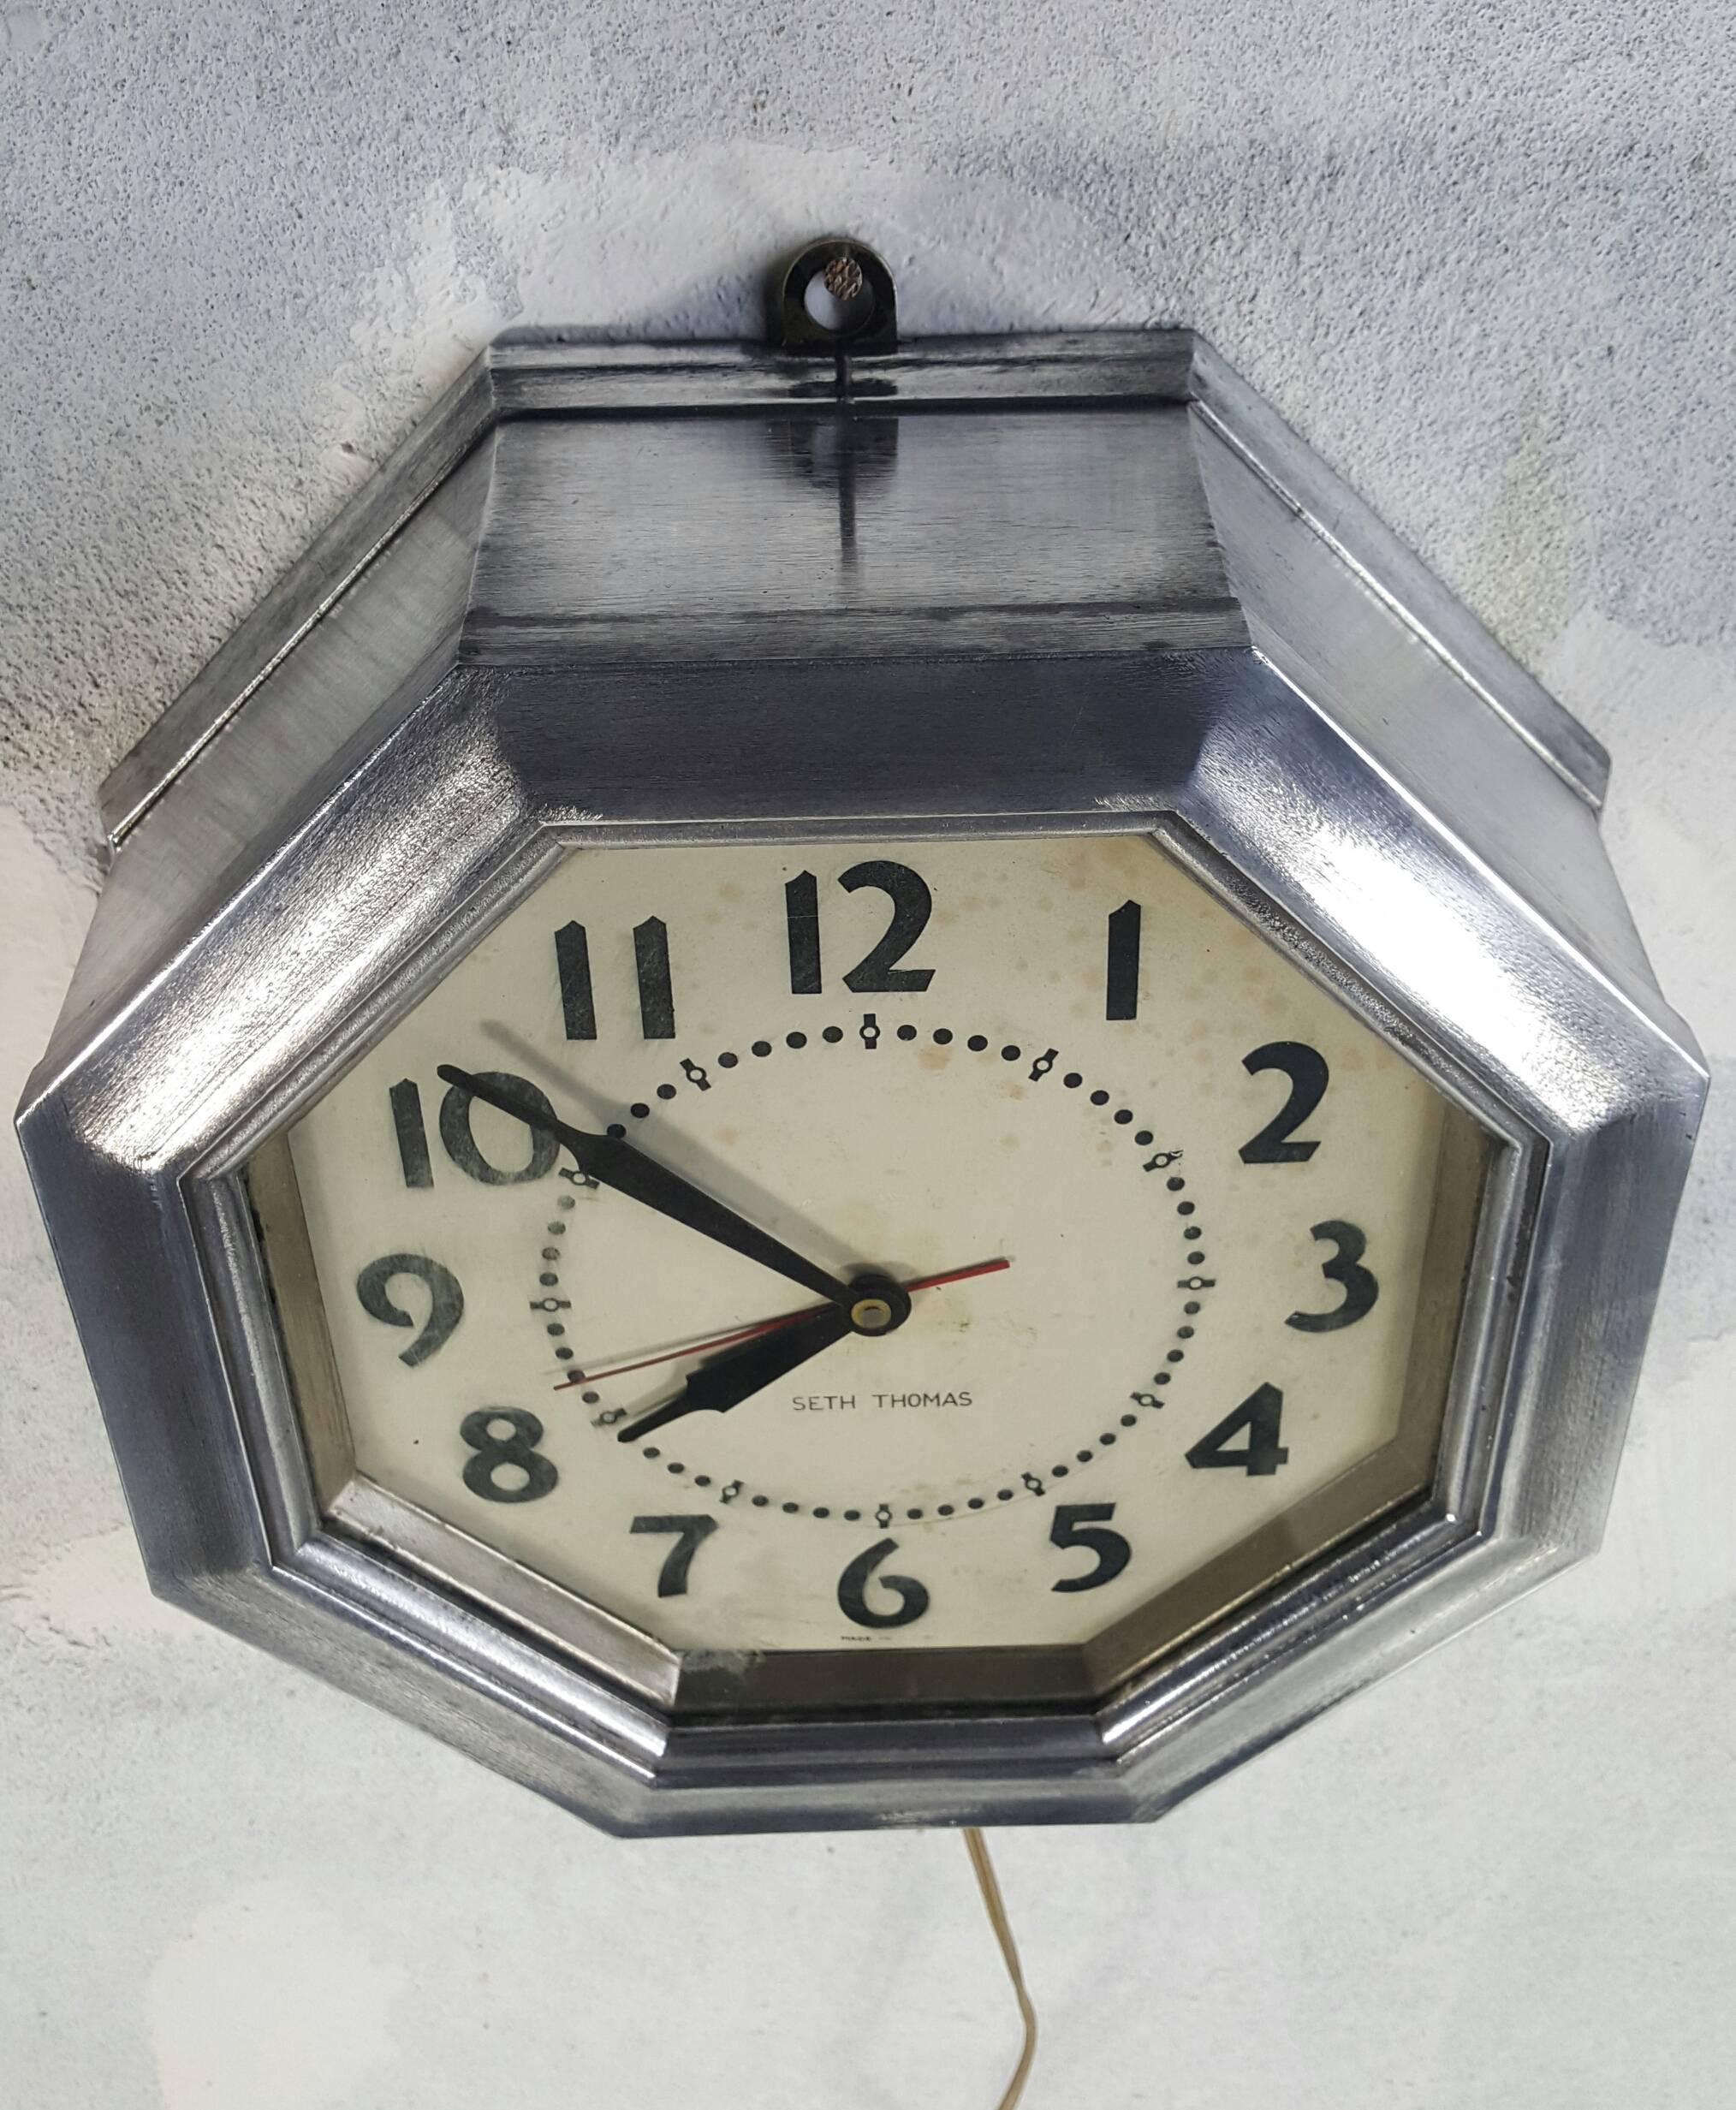 Unusual Art Deco, machine age polished cast aluminium clock manufactured by Seth Thomas, Classic stepped back design, hexagon shape, great size, proportion 11.5